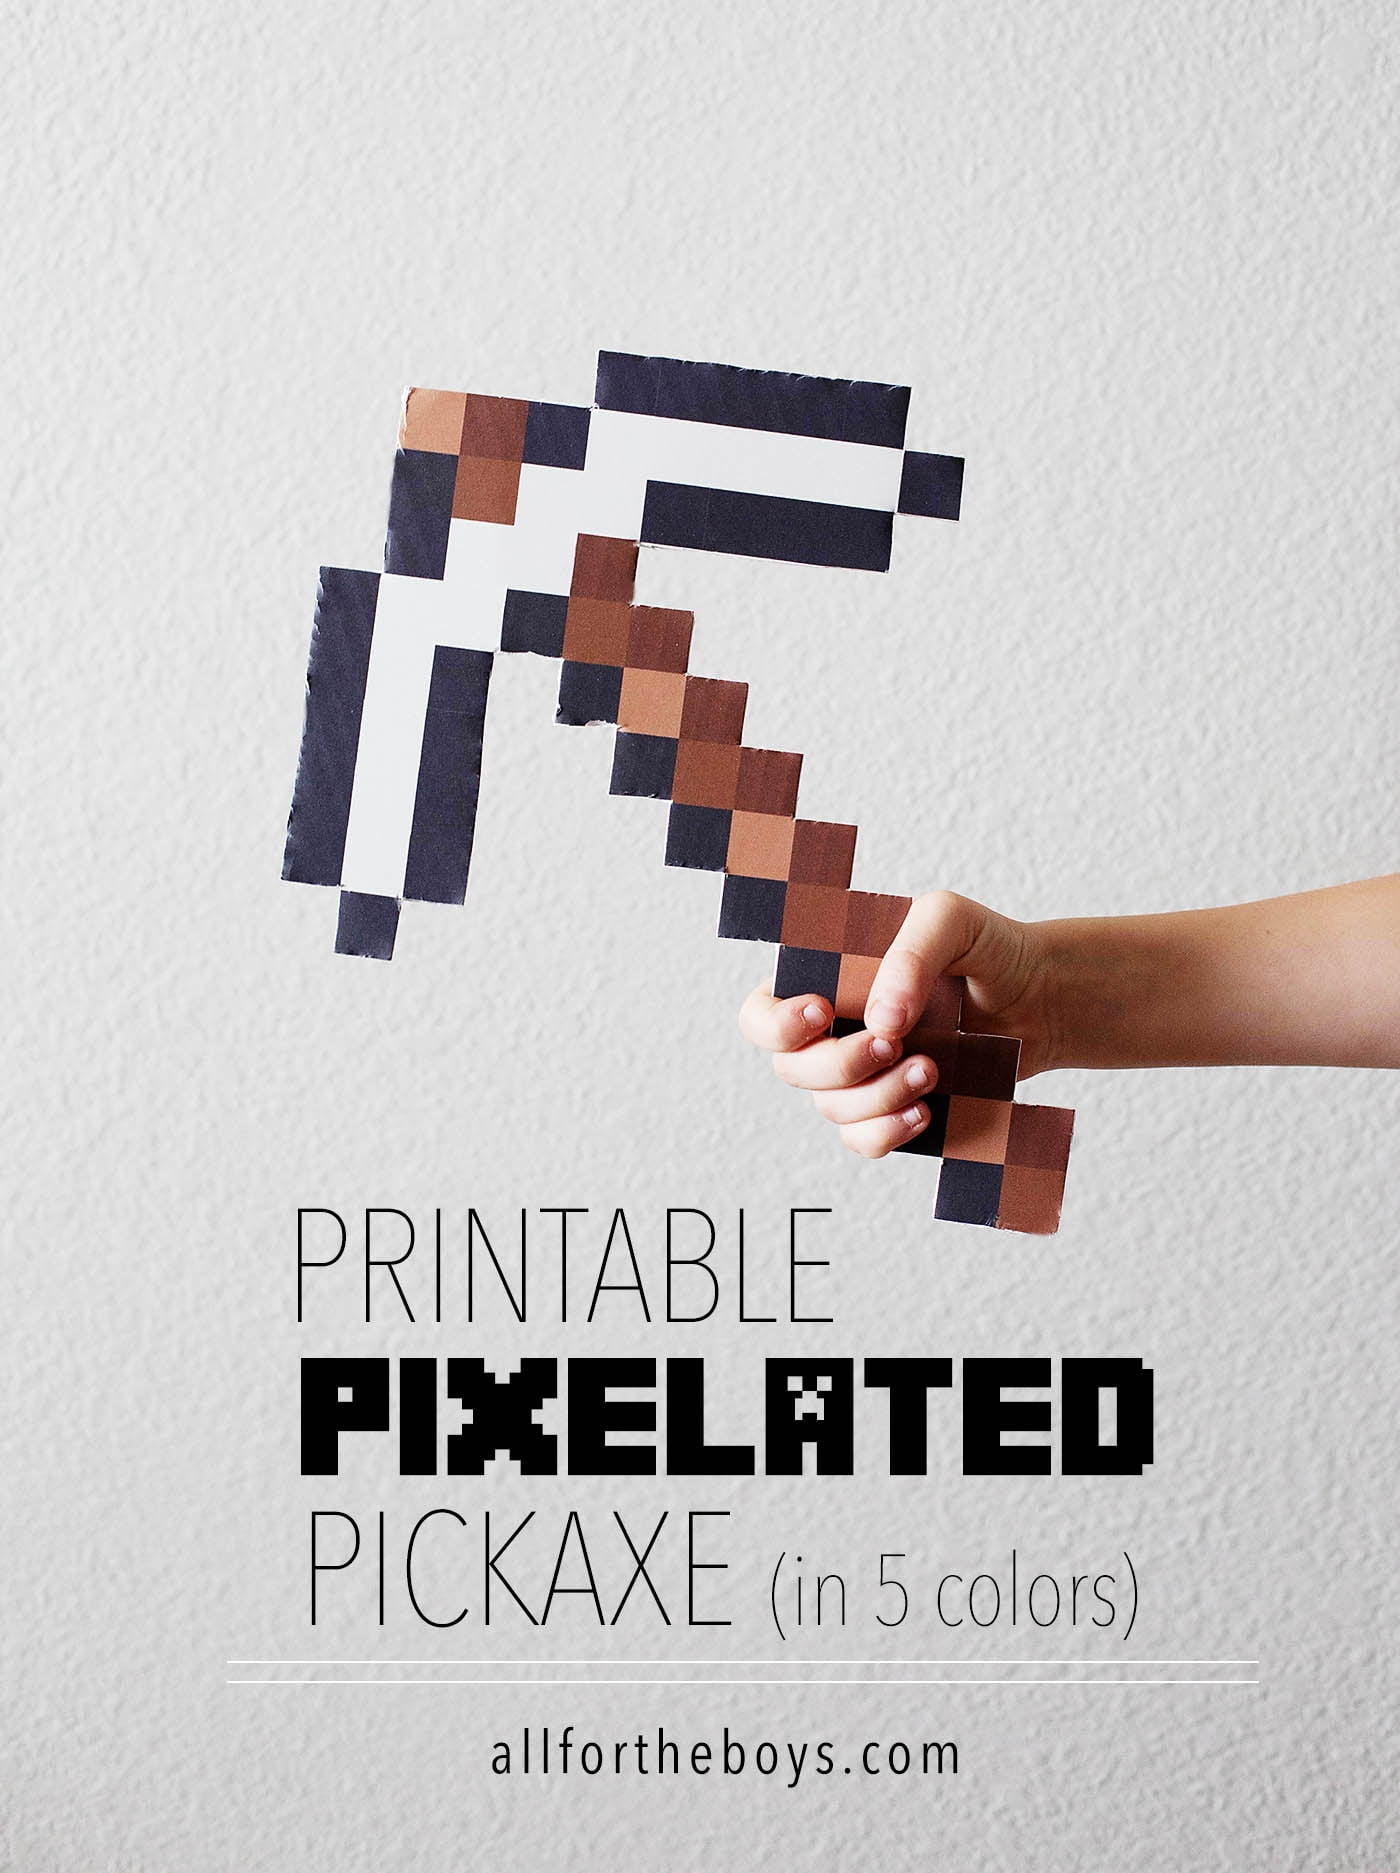 Printable Pixelated Pickaxe All For The Boys